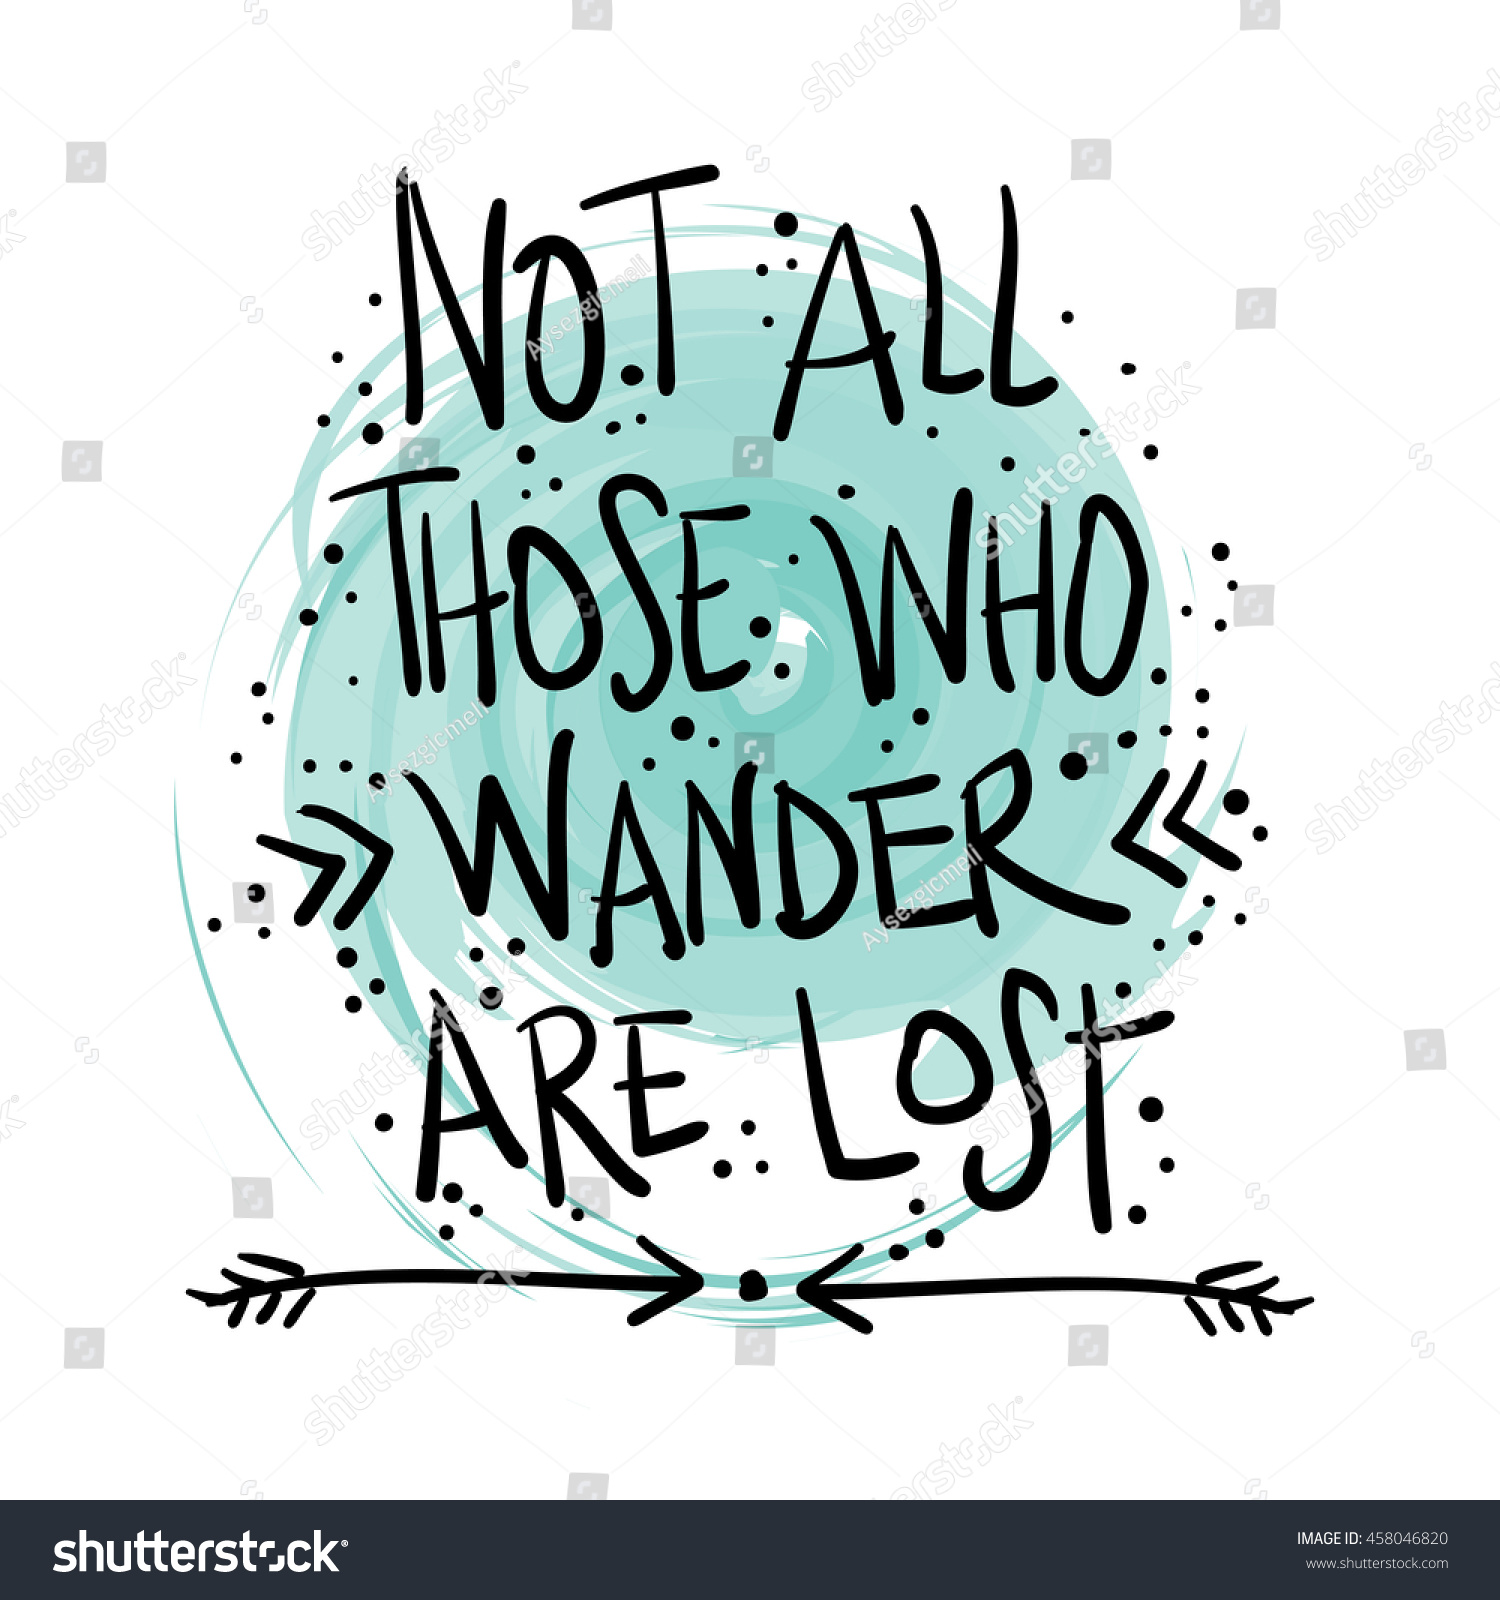 Image result for not all who wander are lost